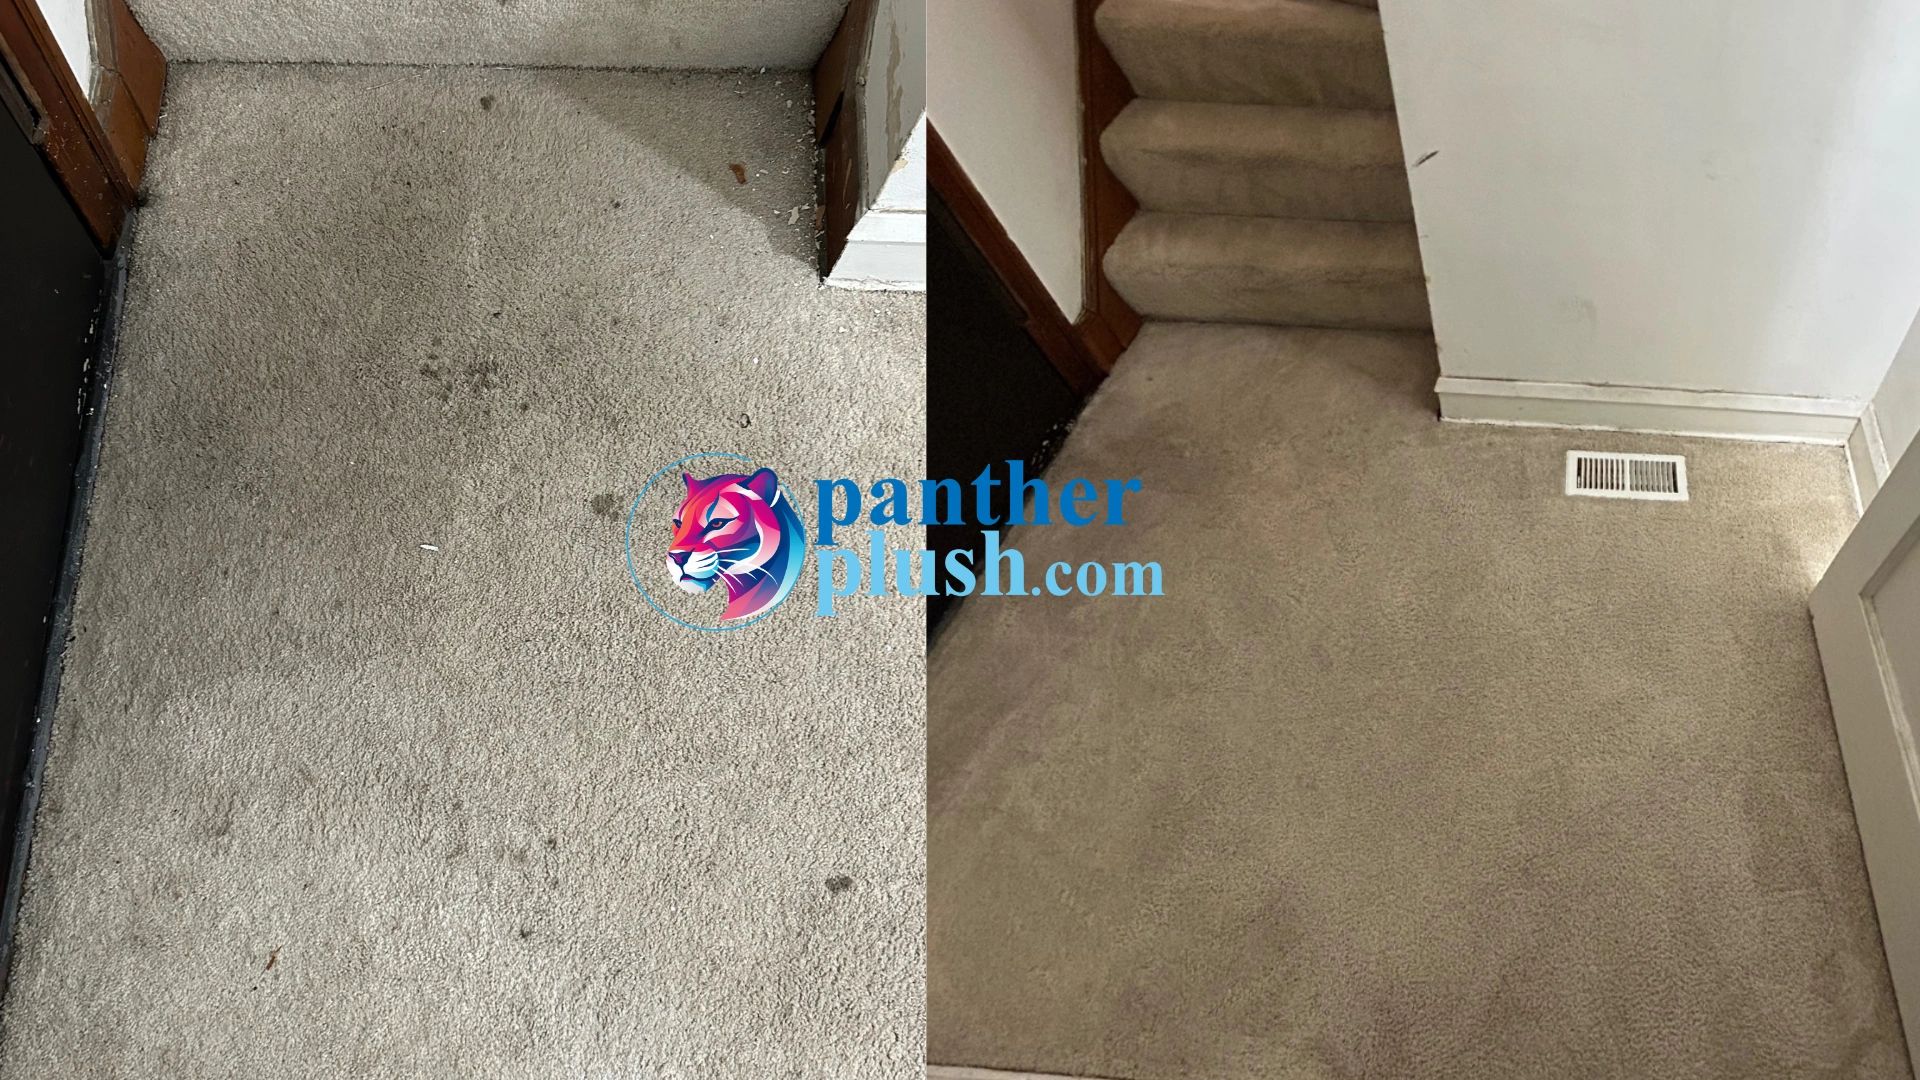 Before and after of dirty carpet being cleaned by carpet cleaning professional at Panther Plush.